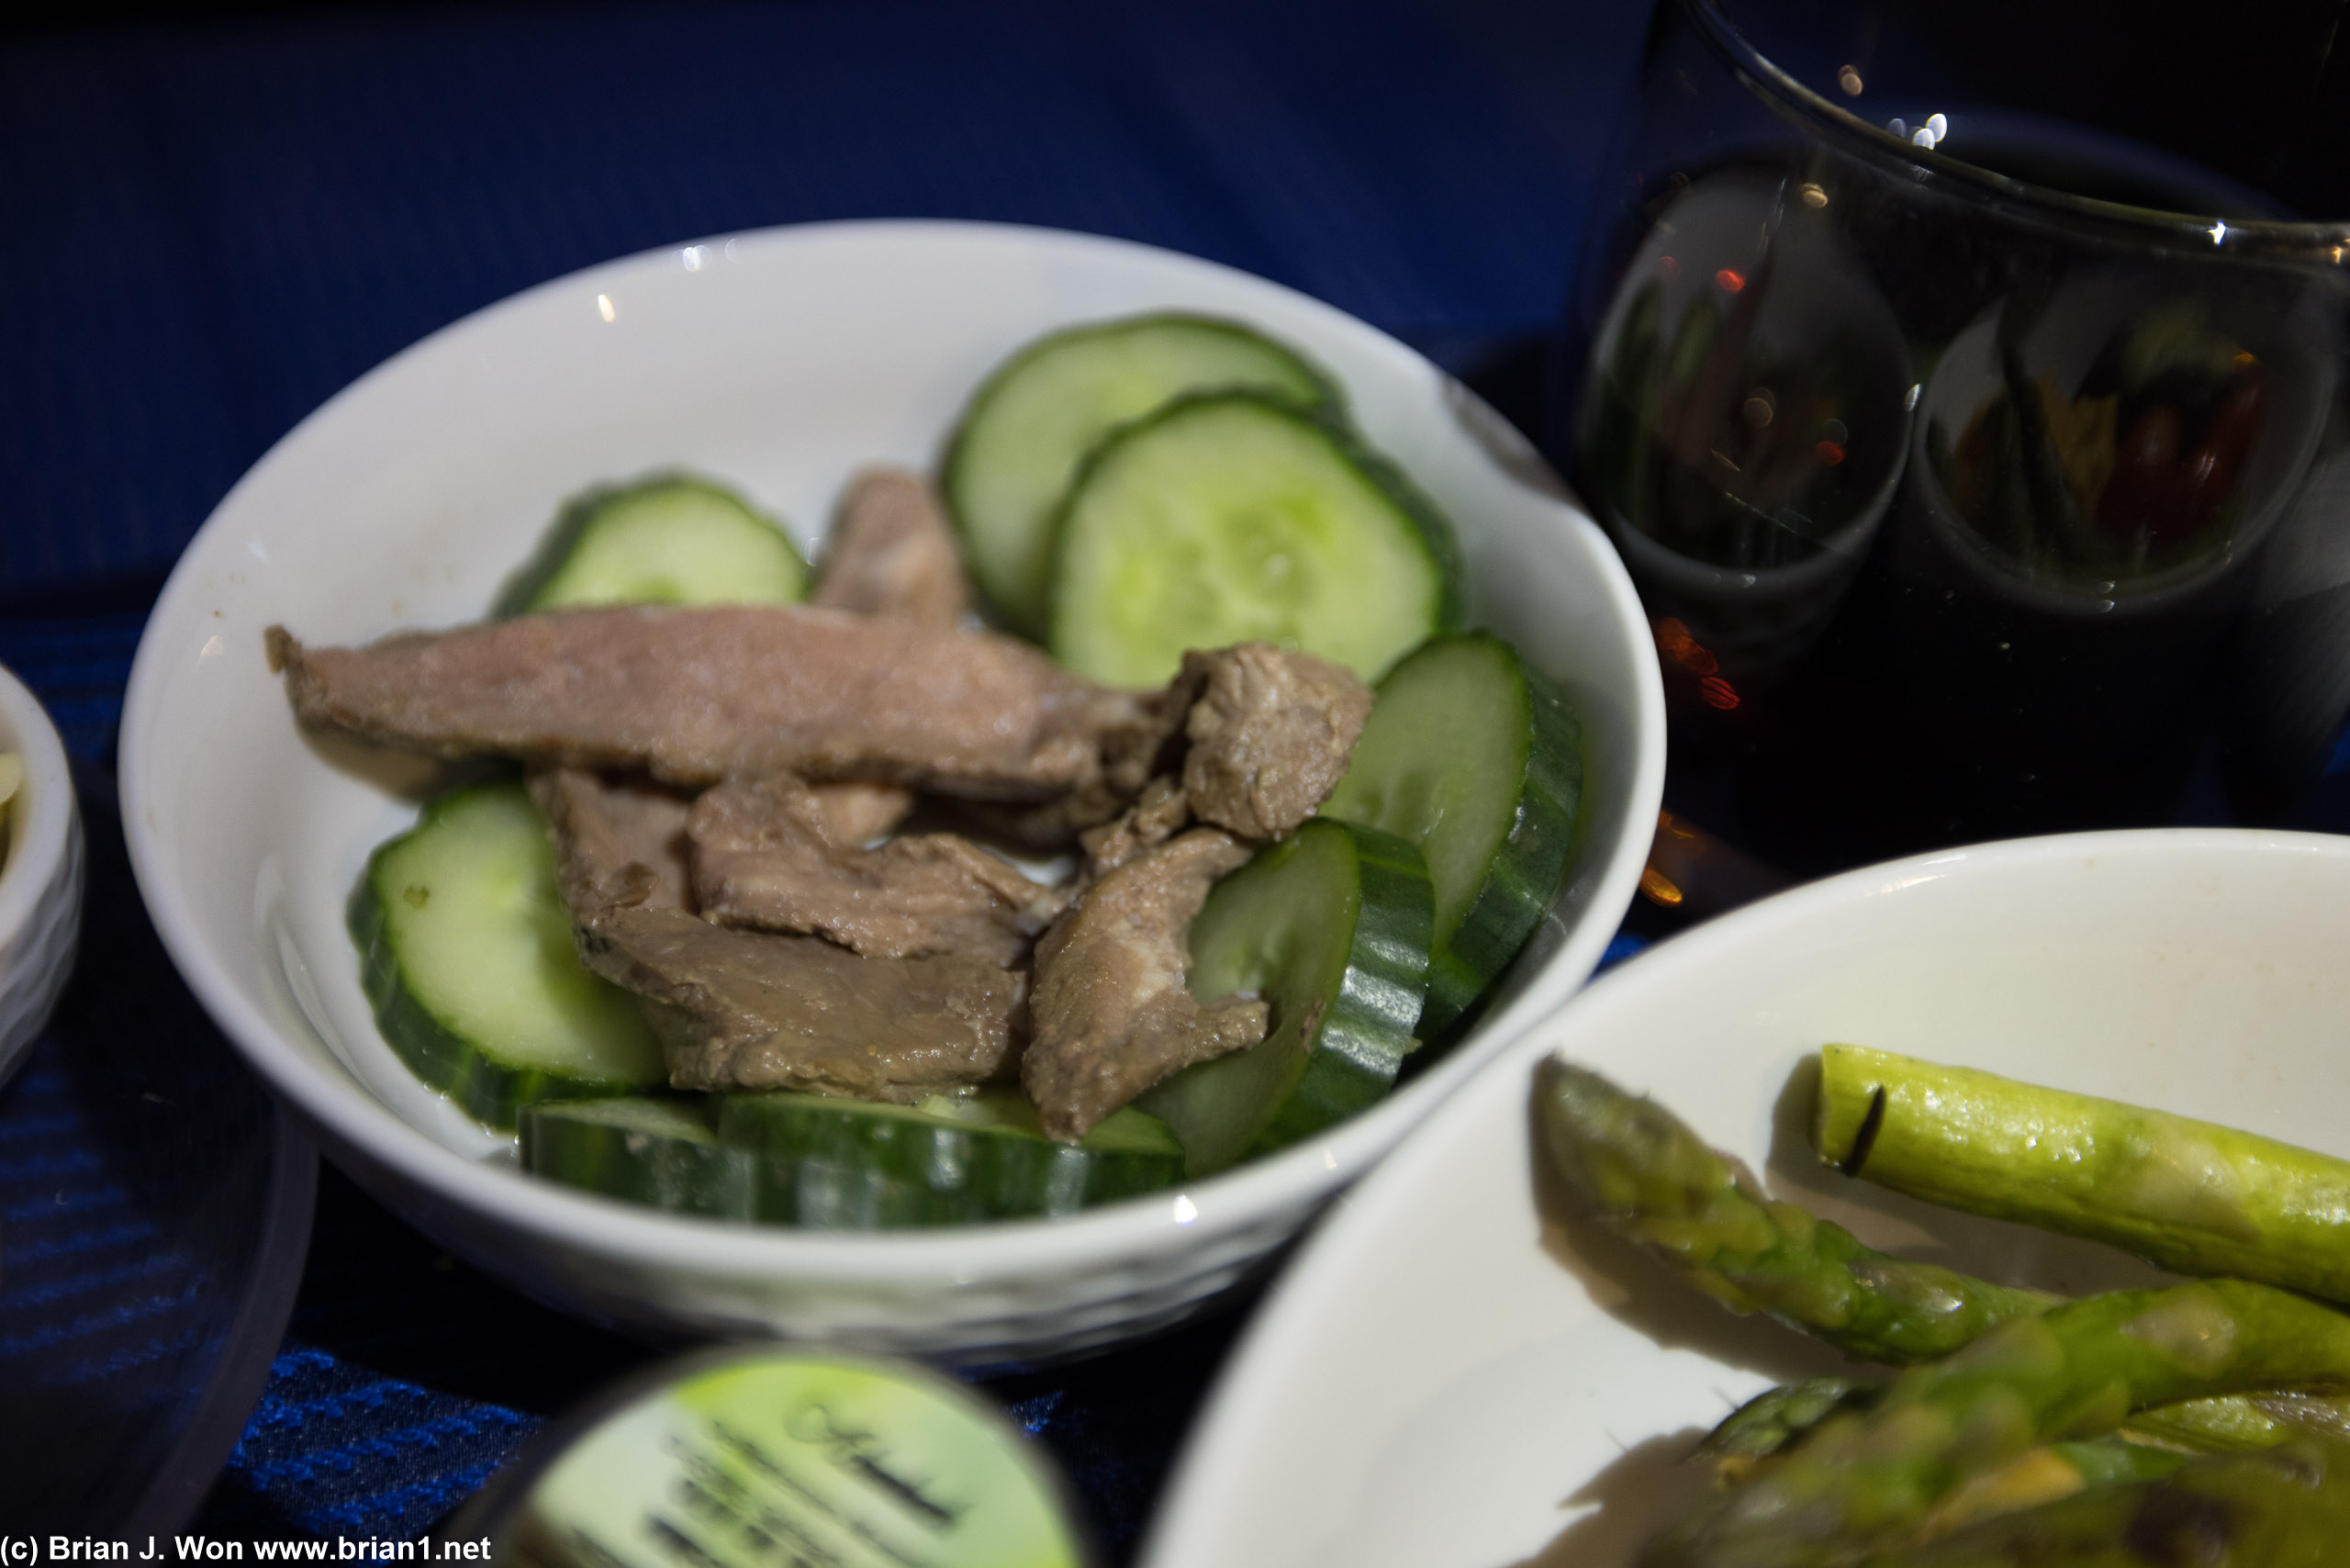 Cold beef and cucumbers go with your beef. Weird.